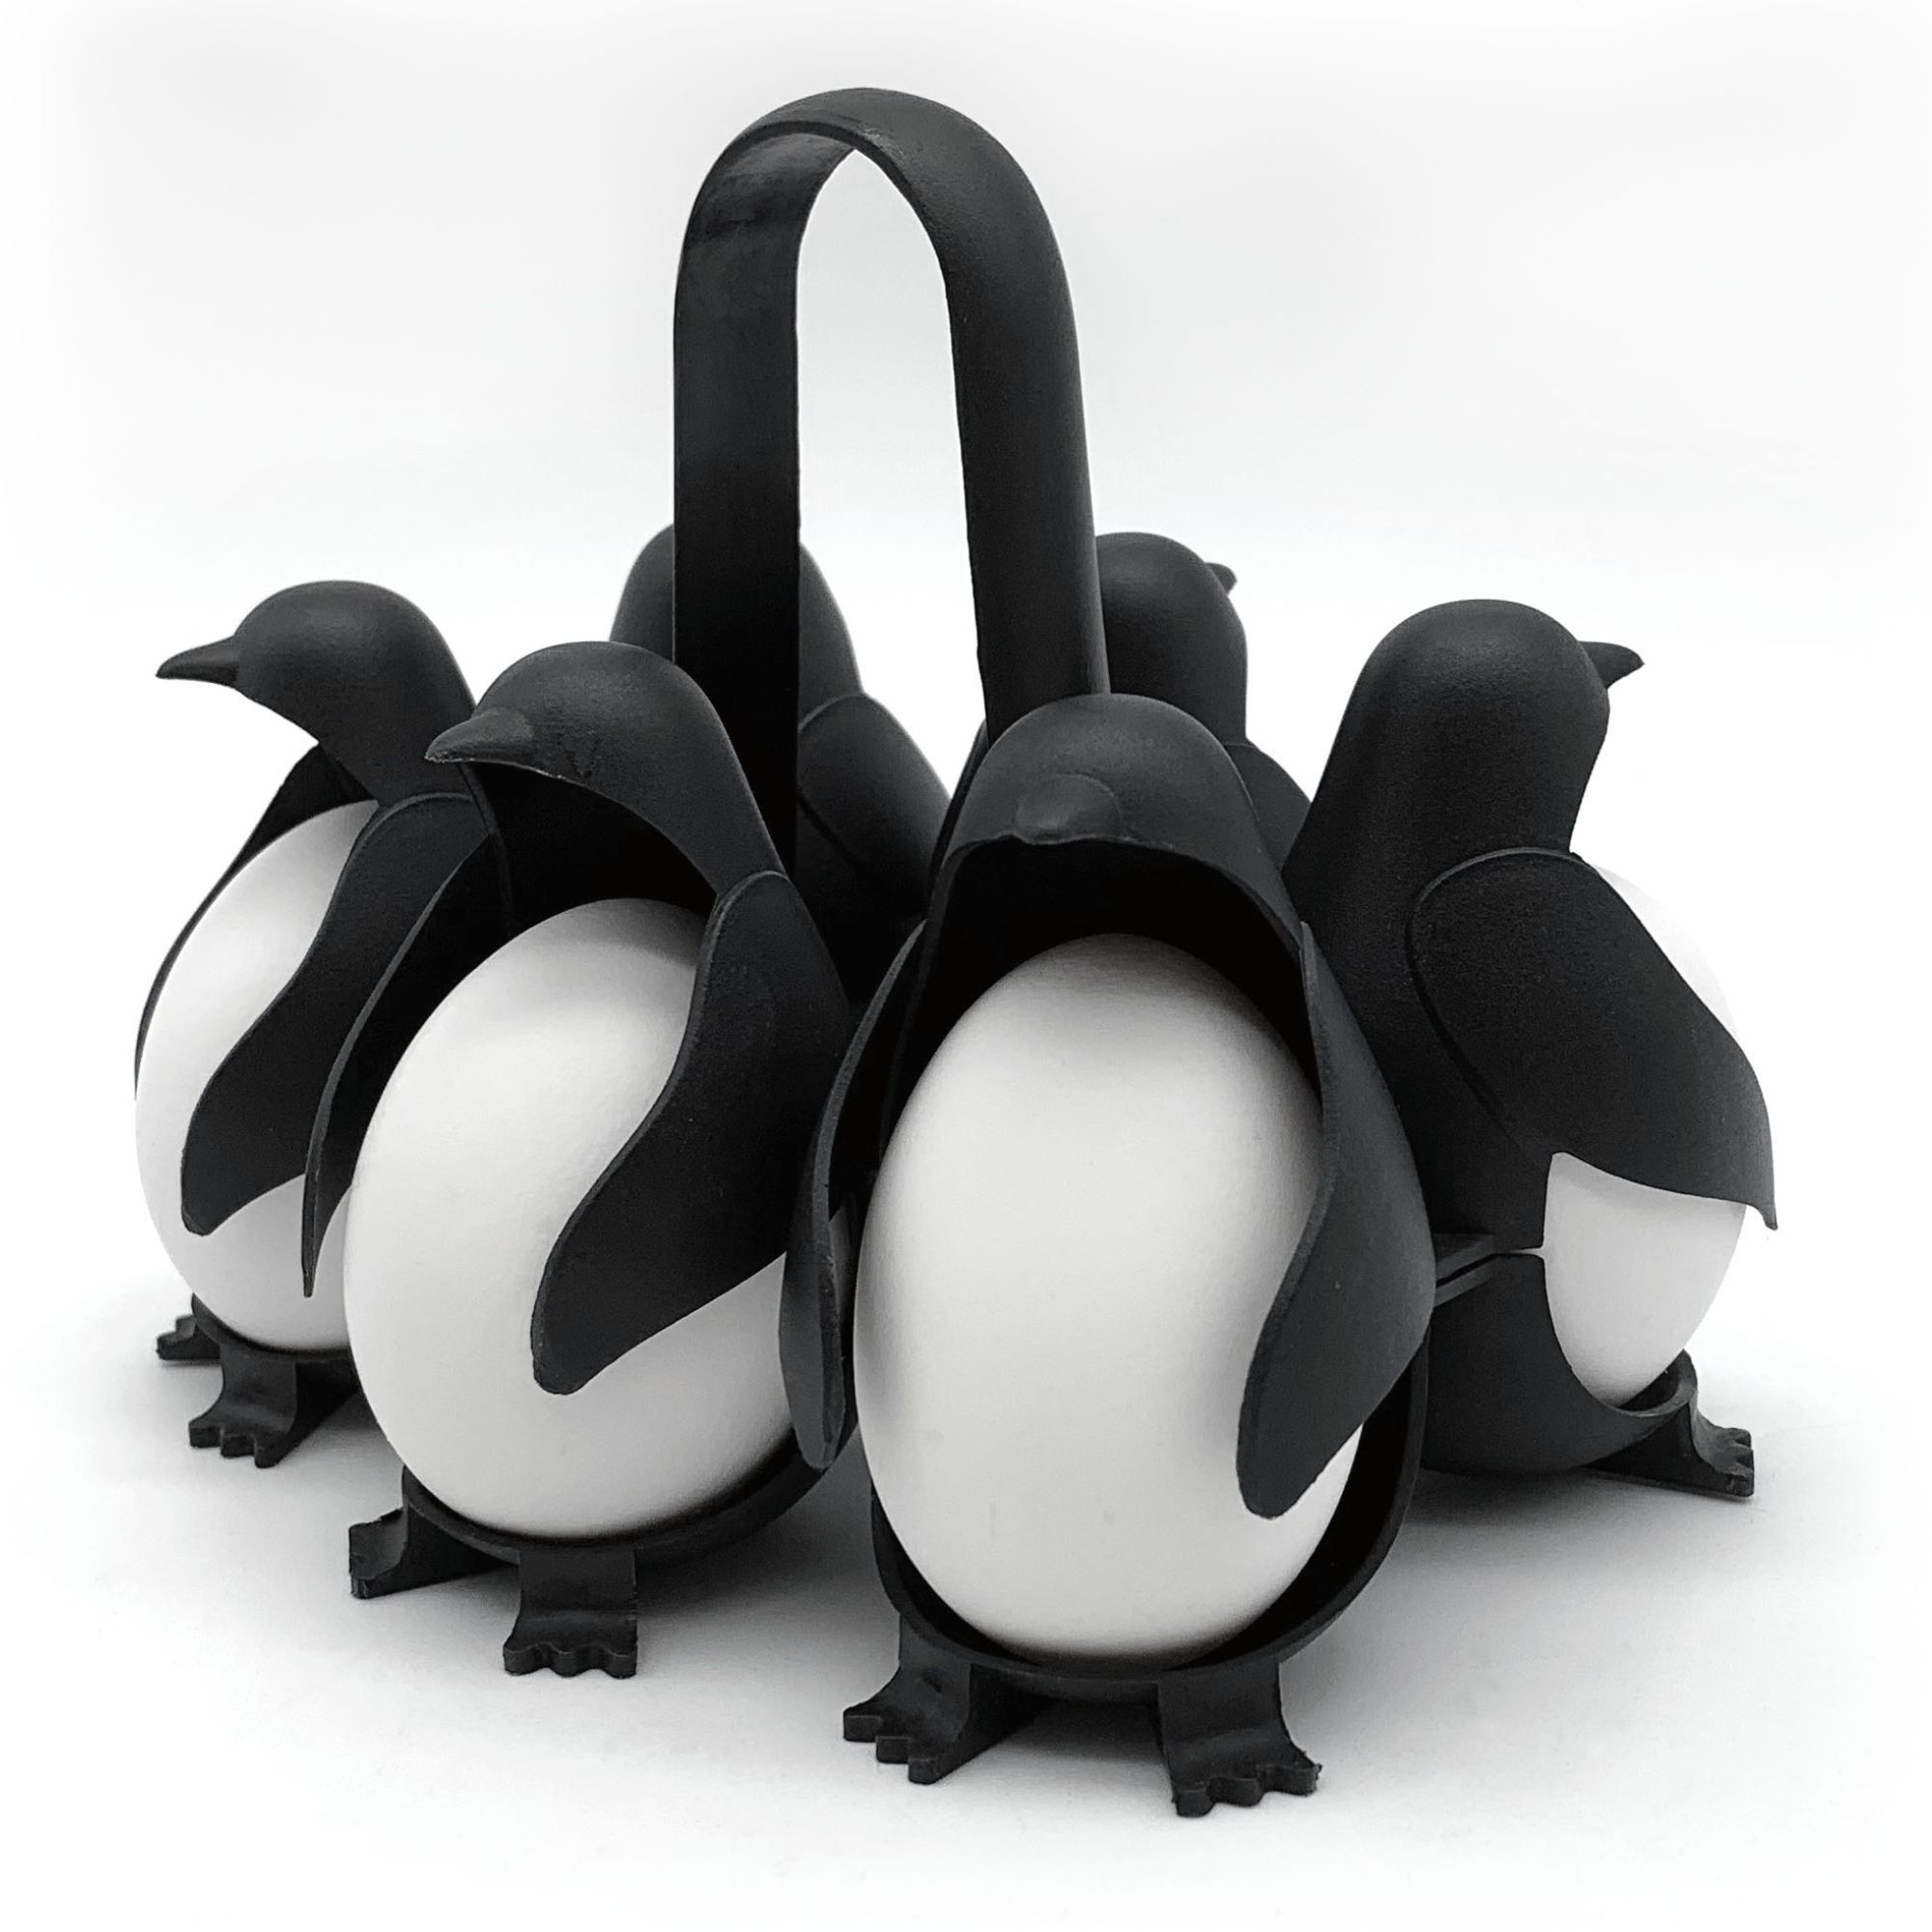 A Clever Penguin Egg Holder to Help With Boiling Eggs